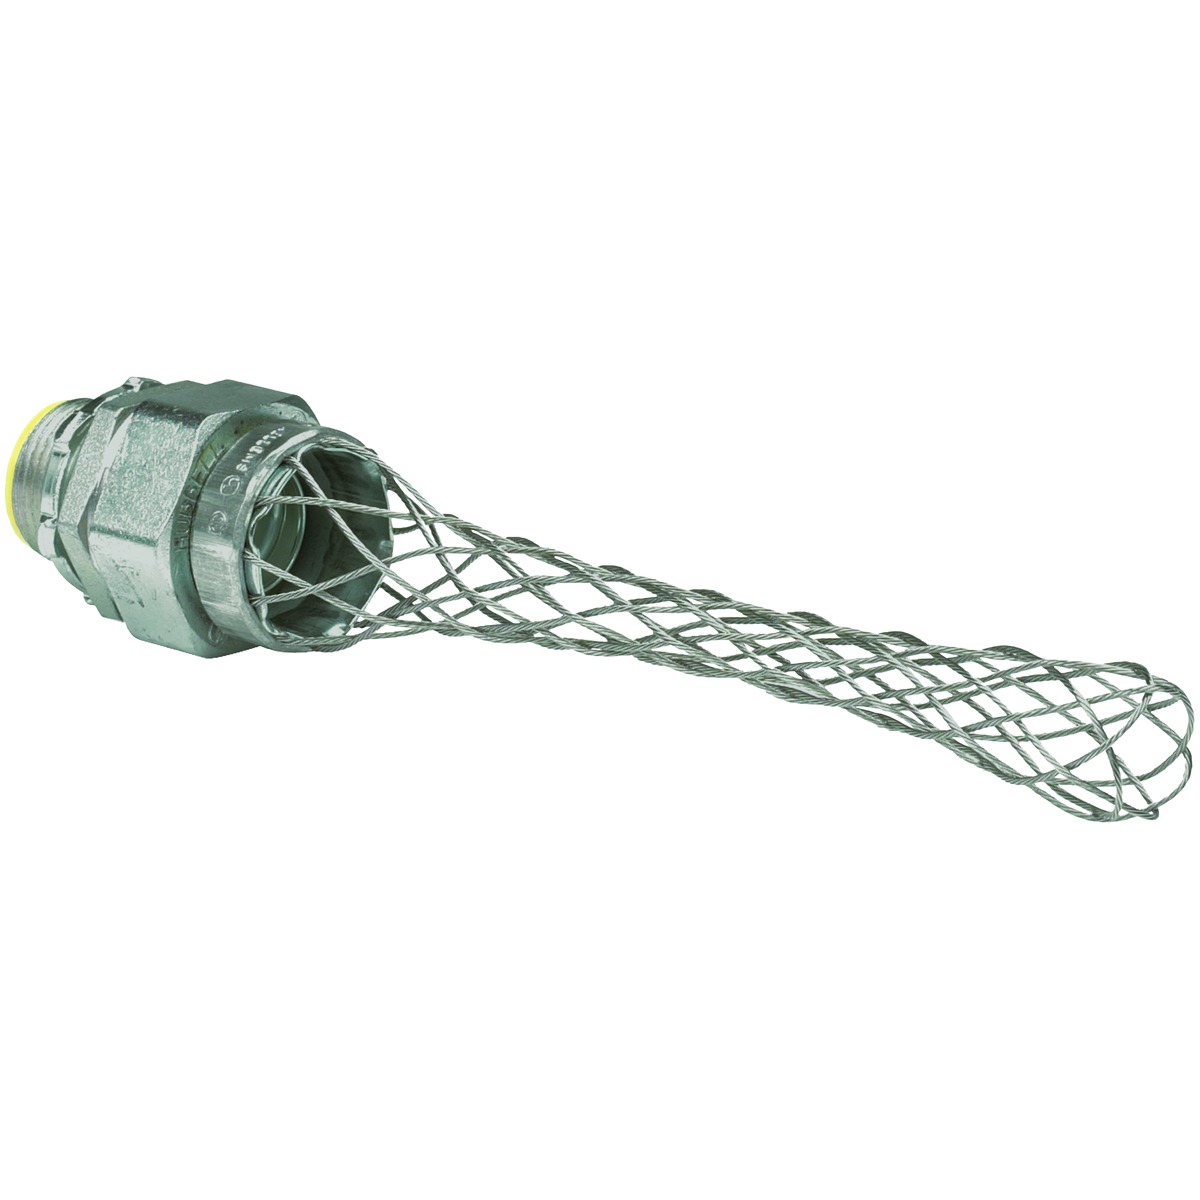 K SERIES FITTINGS - GROUNDED LIQUIDTIGHT CONNECTORS - K LIQUIDTIGHTGROUNDING STYLE WITH MESH GRIP - STRAIGHT INSULATED - NPT SIZE 3/4 IN